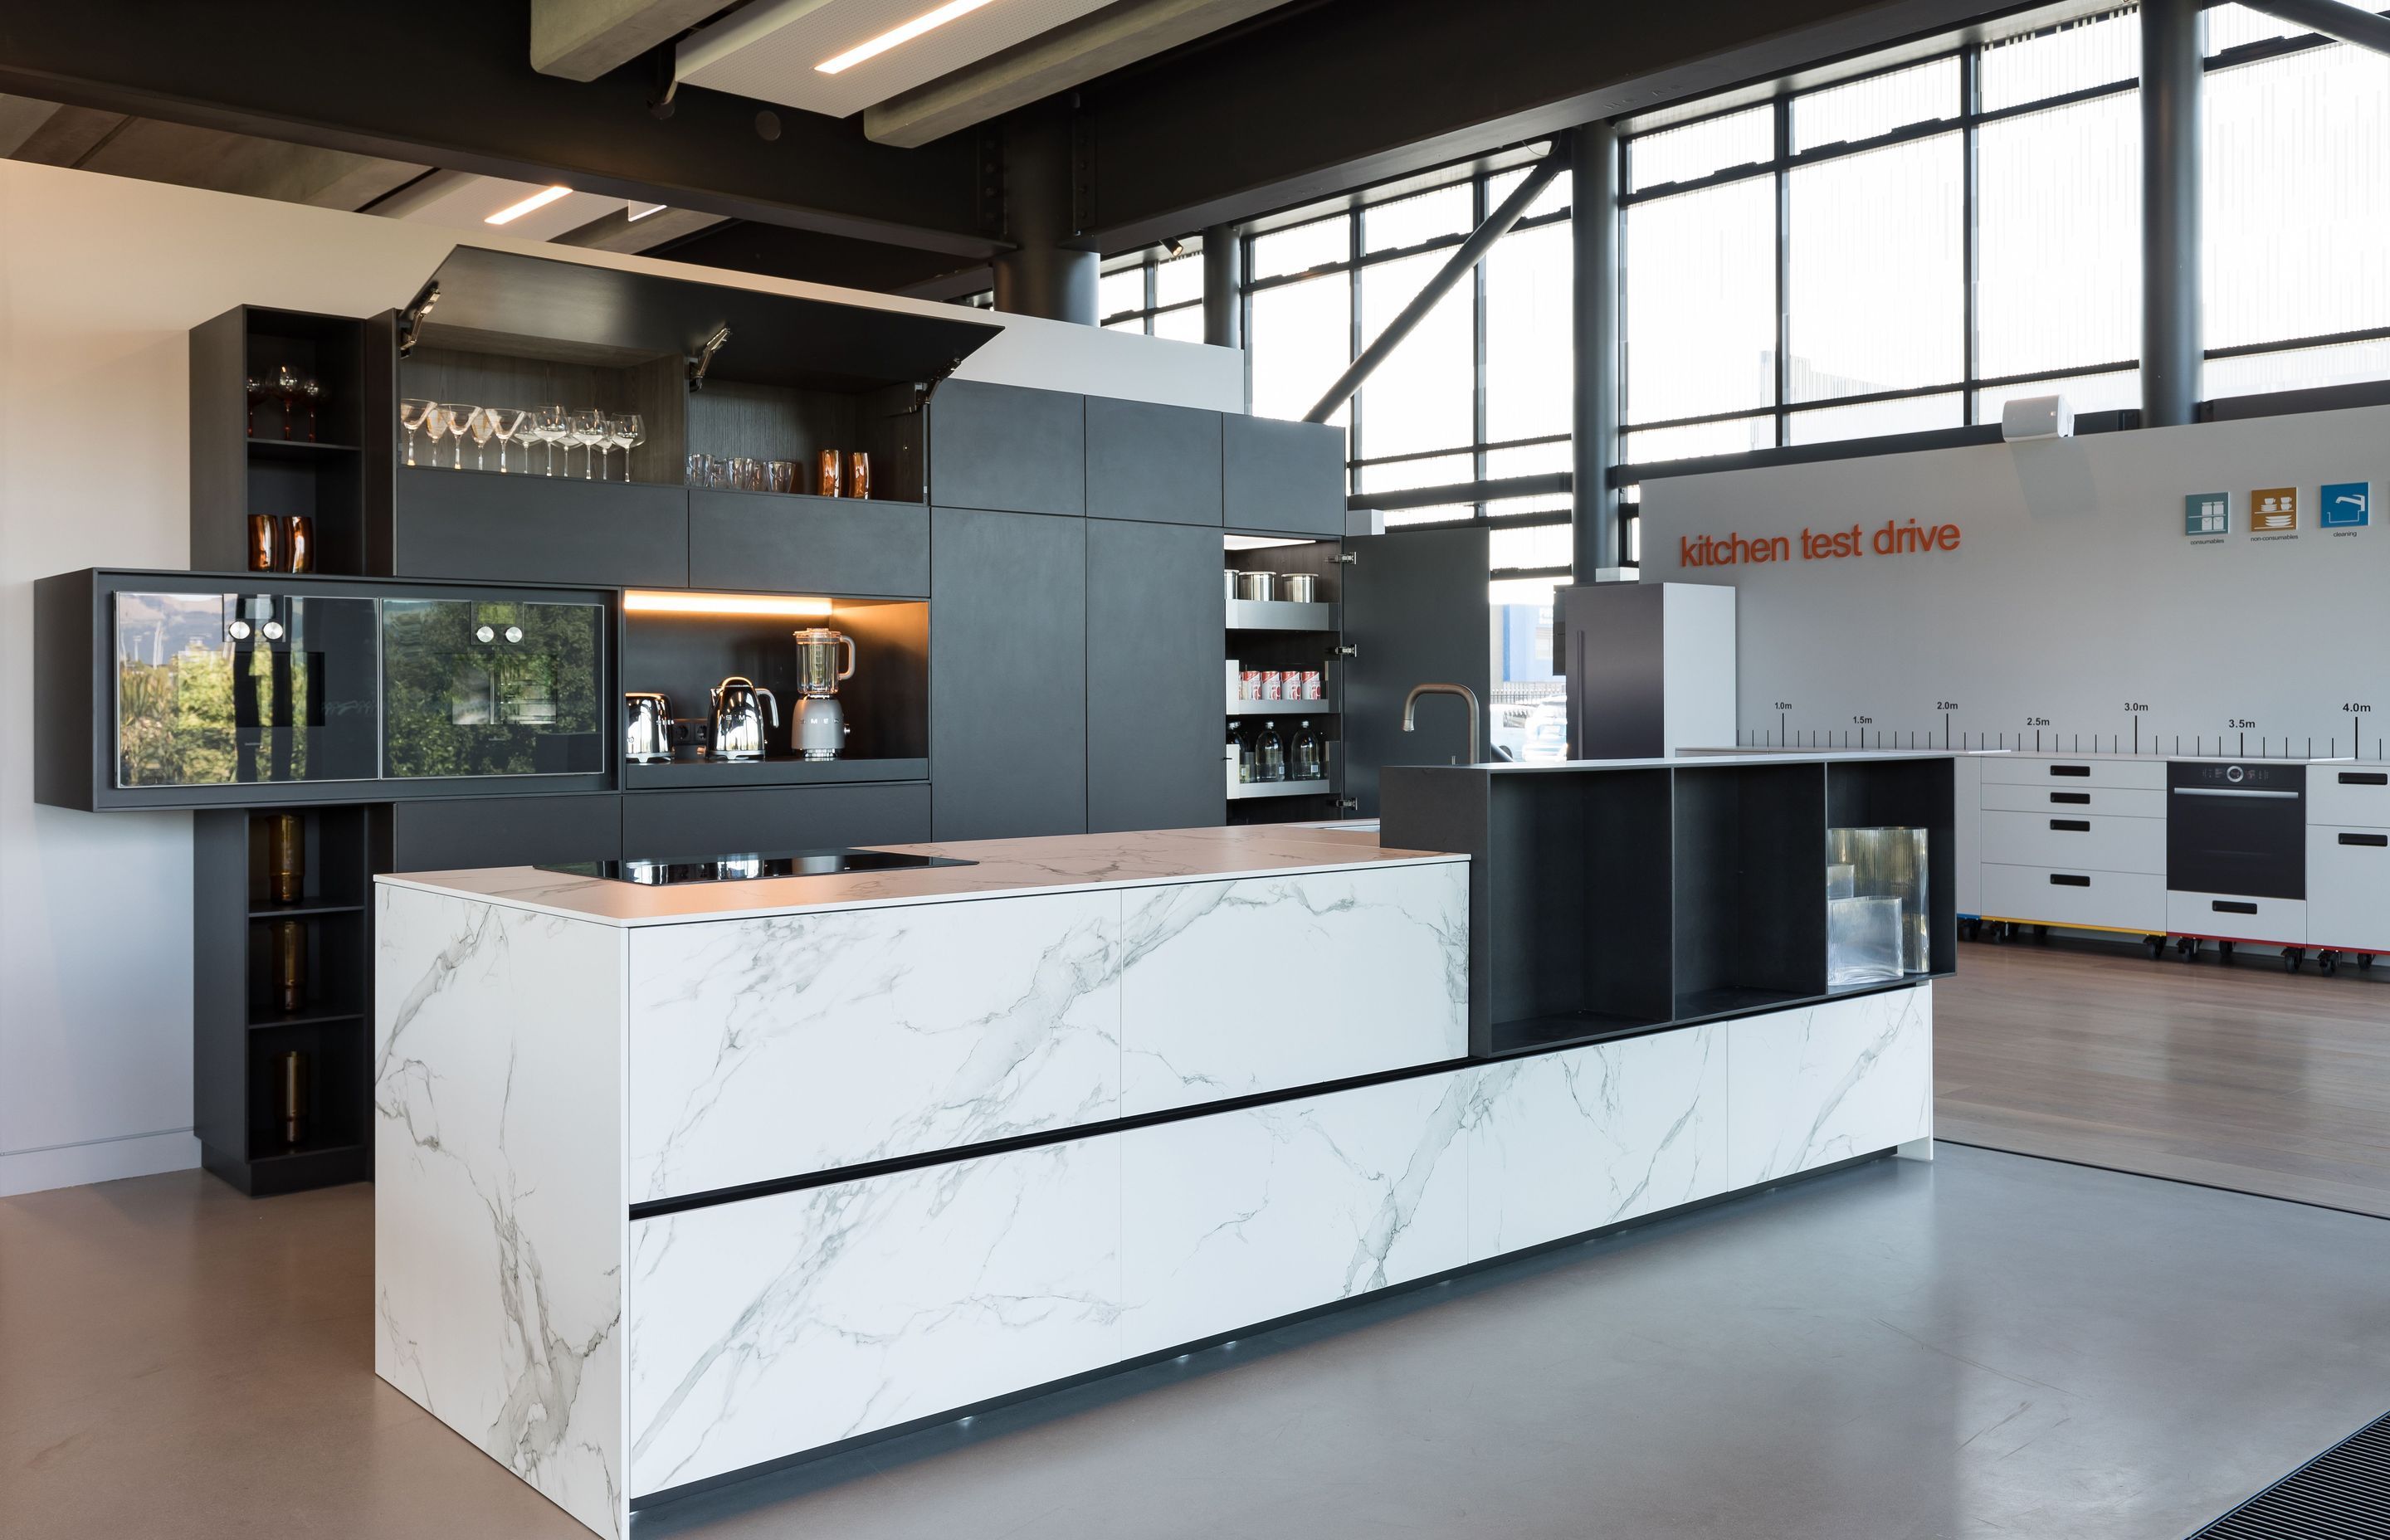 The new showroom in Wigram is designed to allow customers to test out their kitchens.